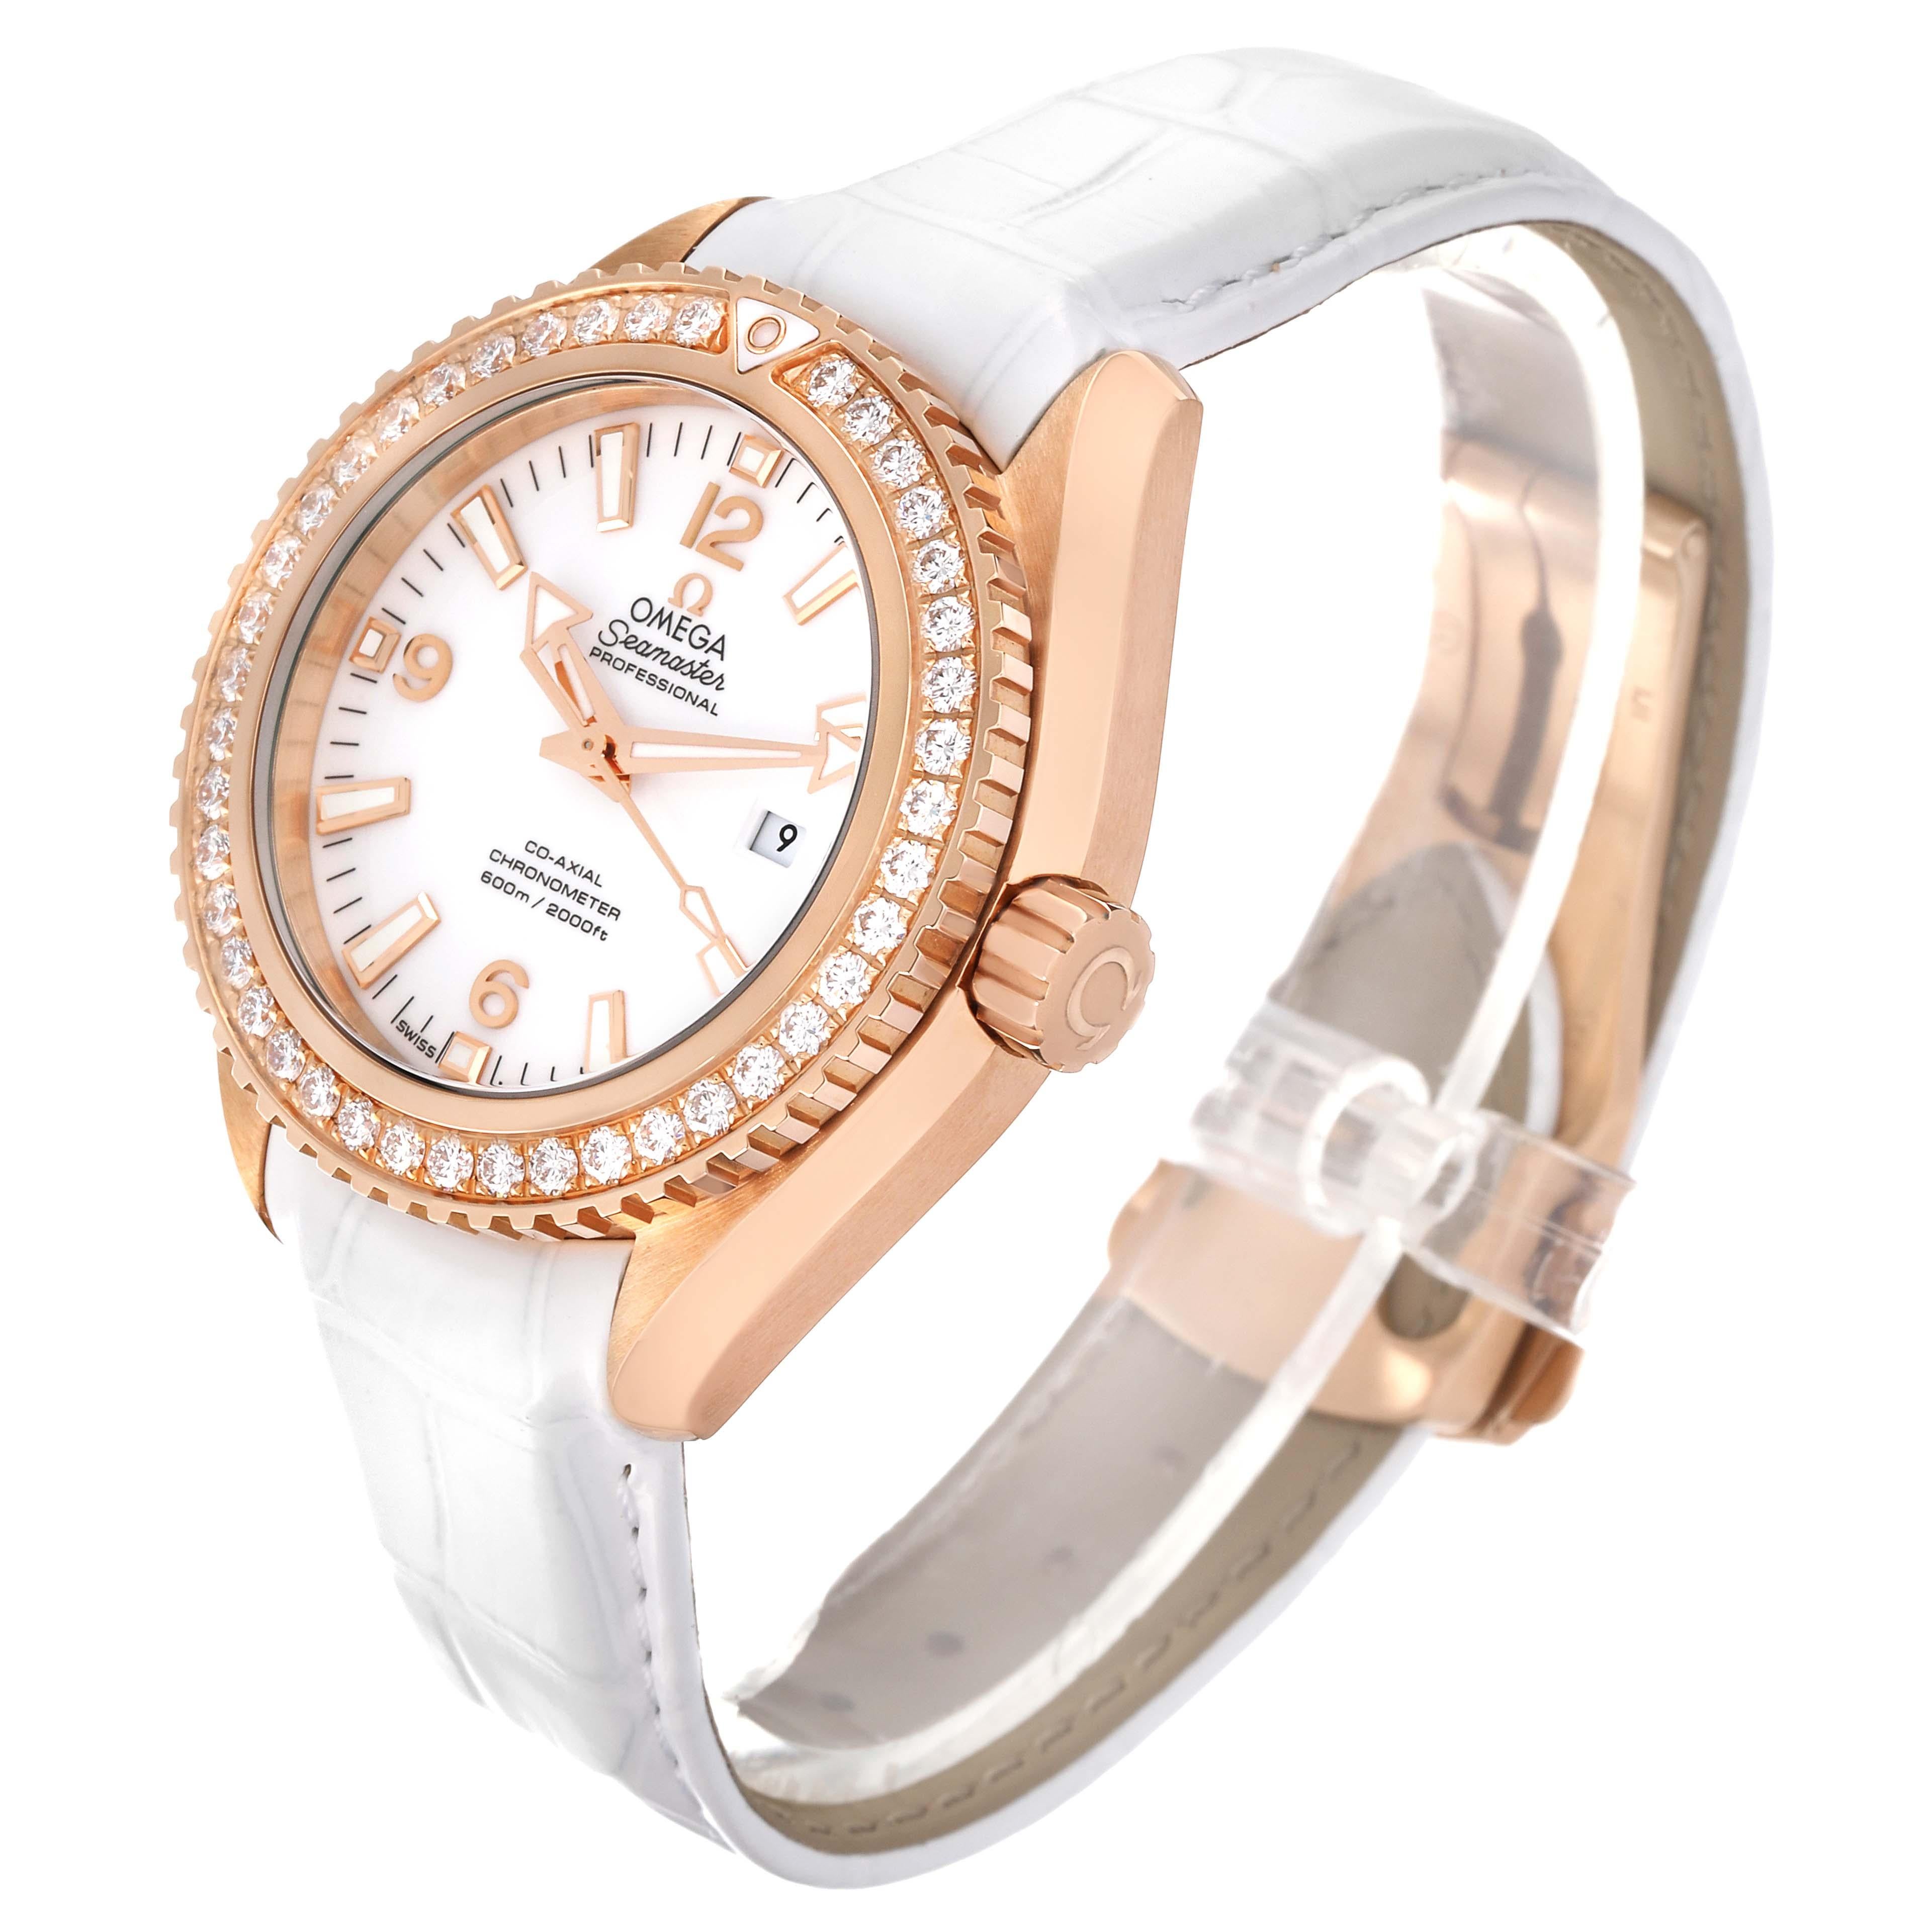 Omega Seamaster Planet Ocean Rose Gold Diamond Ladies Watch 232.58.38.20.04.001 For Sale 5